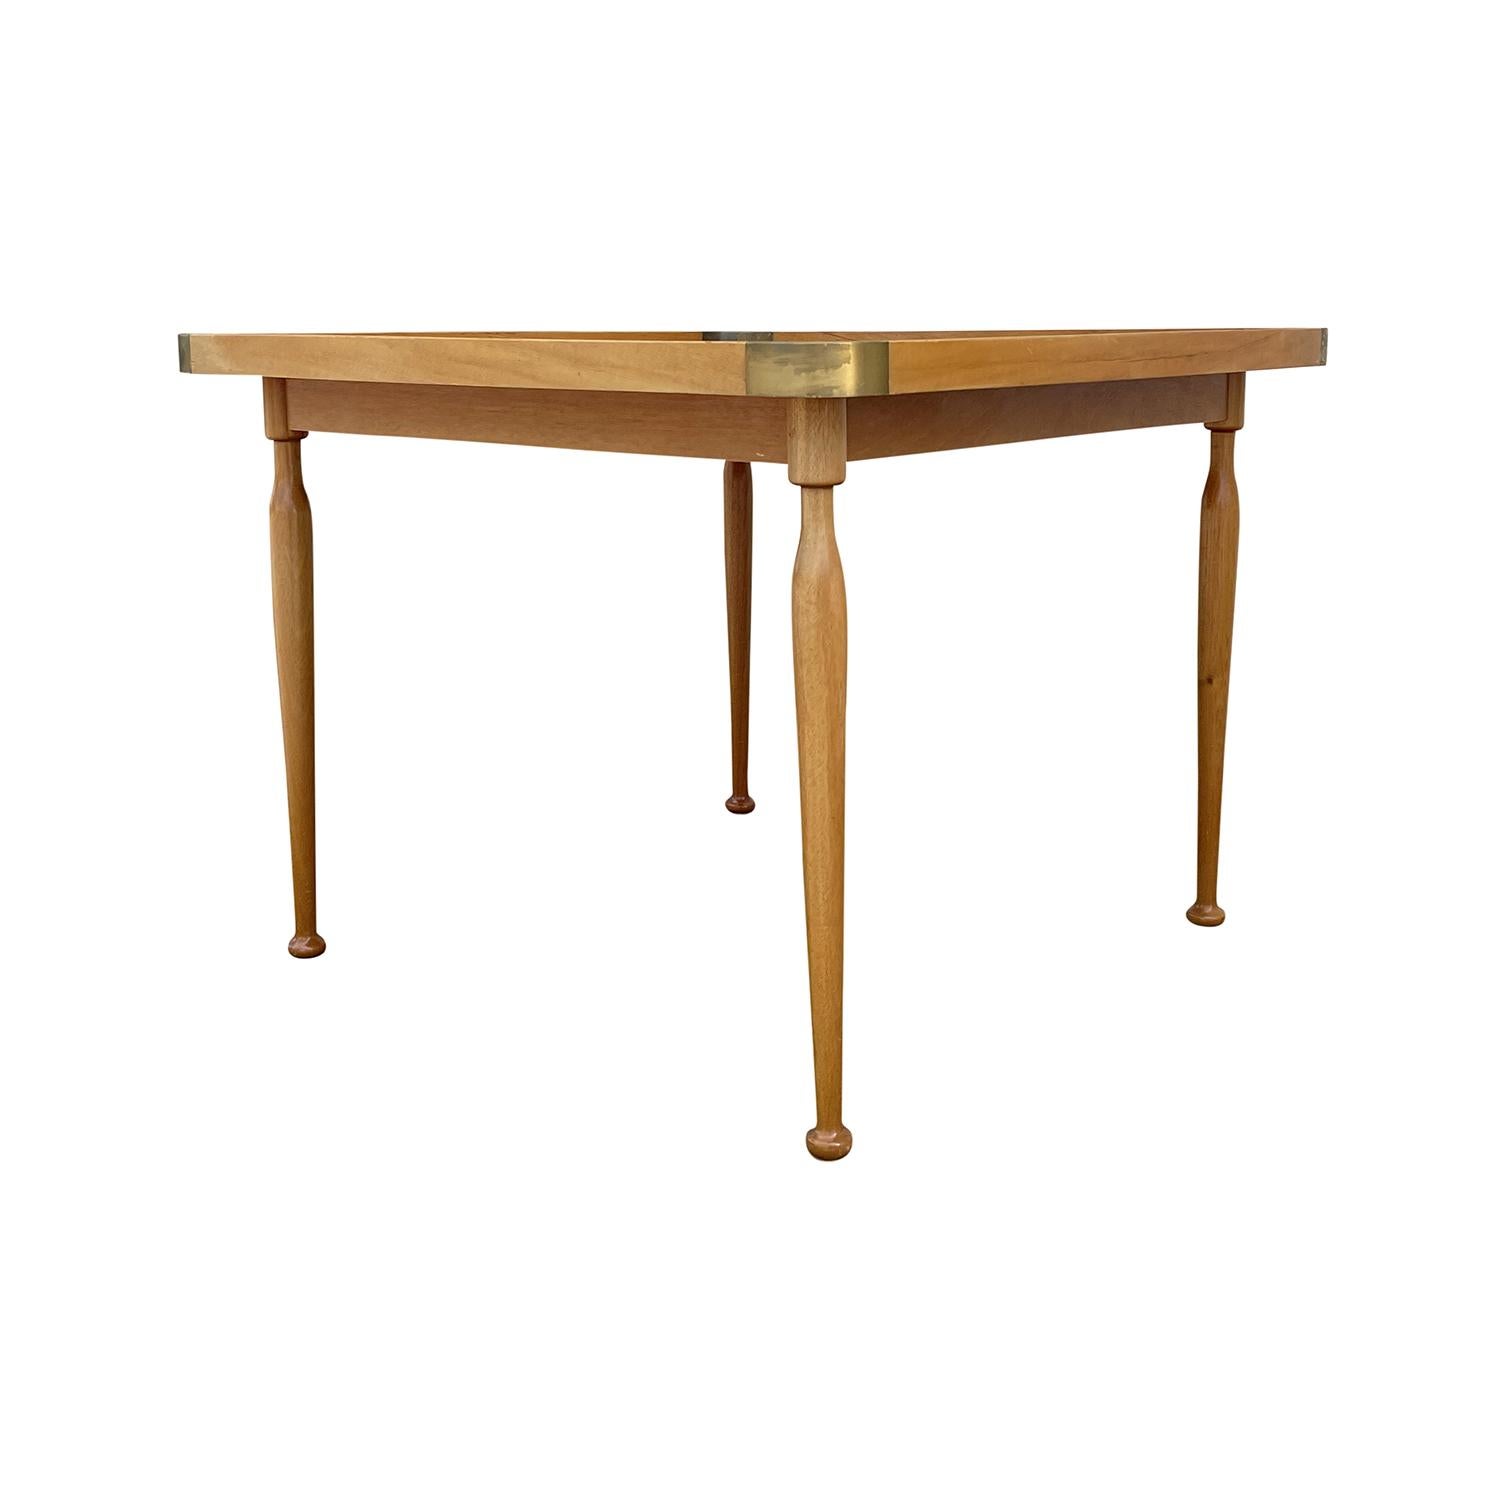 20th Century Swedish Vintage Svenskt Tenn Mahogany Coffee Table by Josef Frank In Good Condition For Sale In West Palm Beach, FL